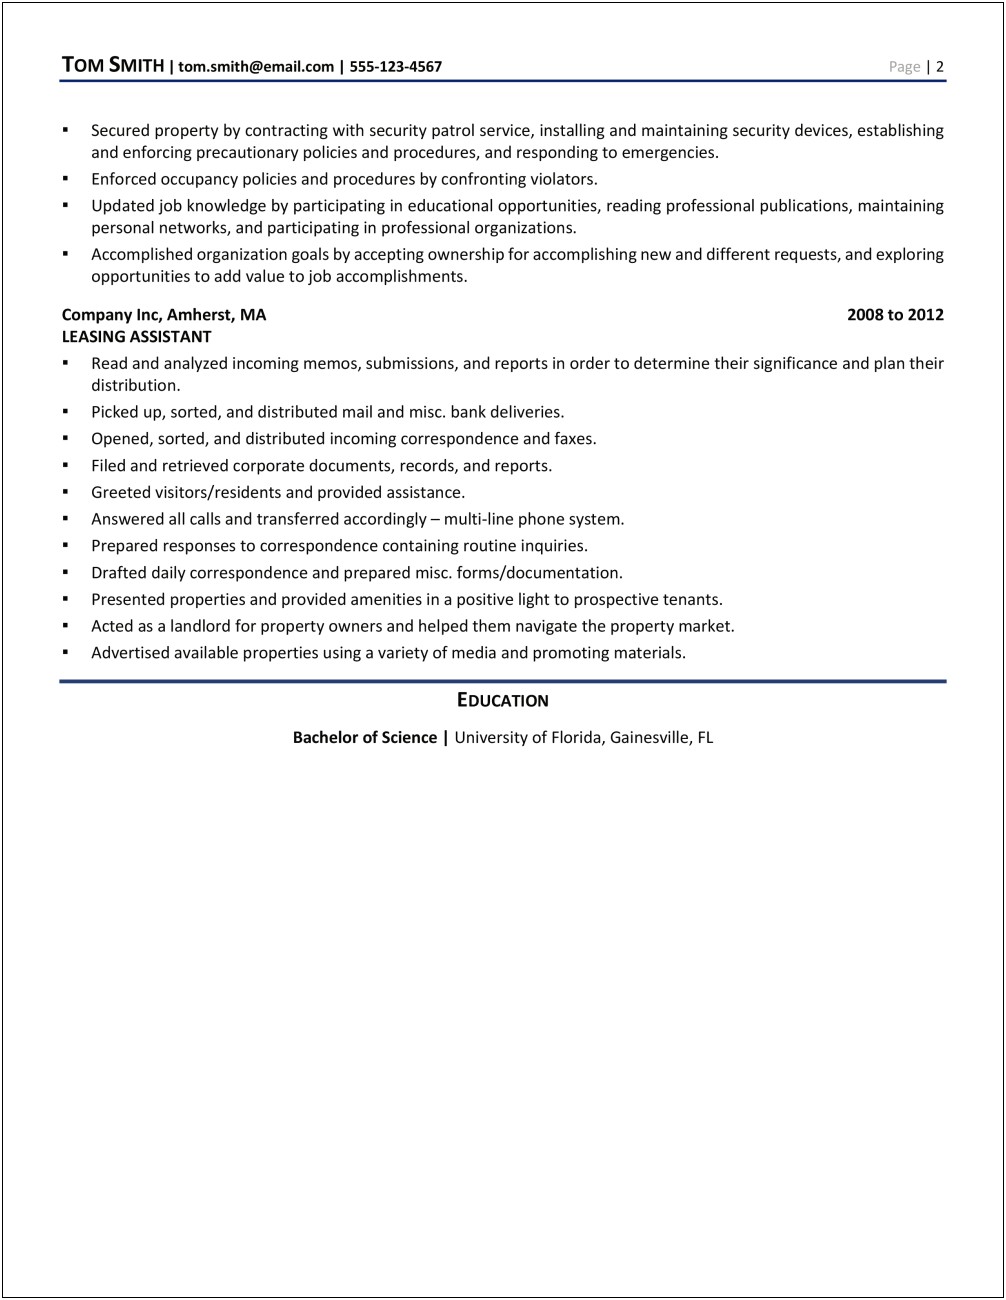 Sample Resume For Insurance Adjuster With No Experience